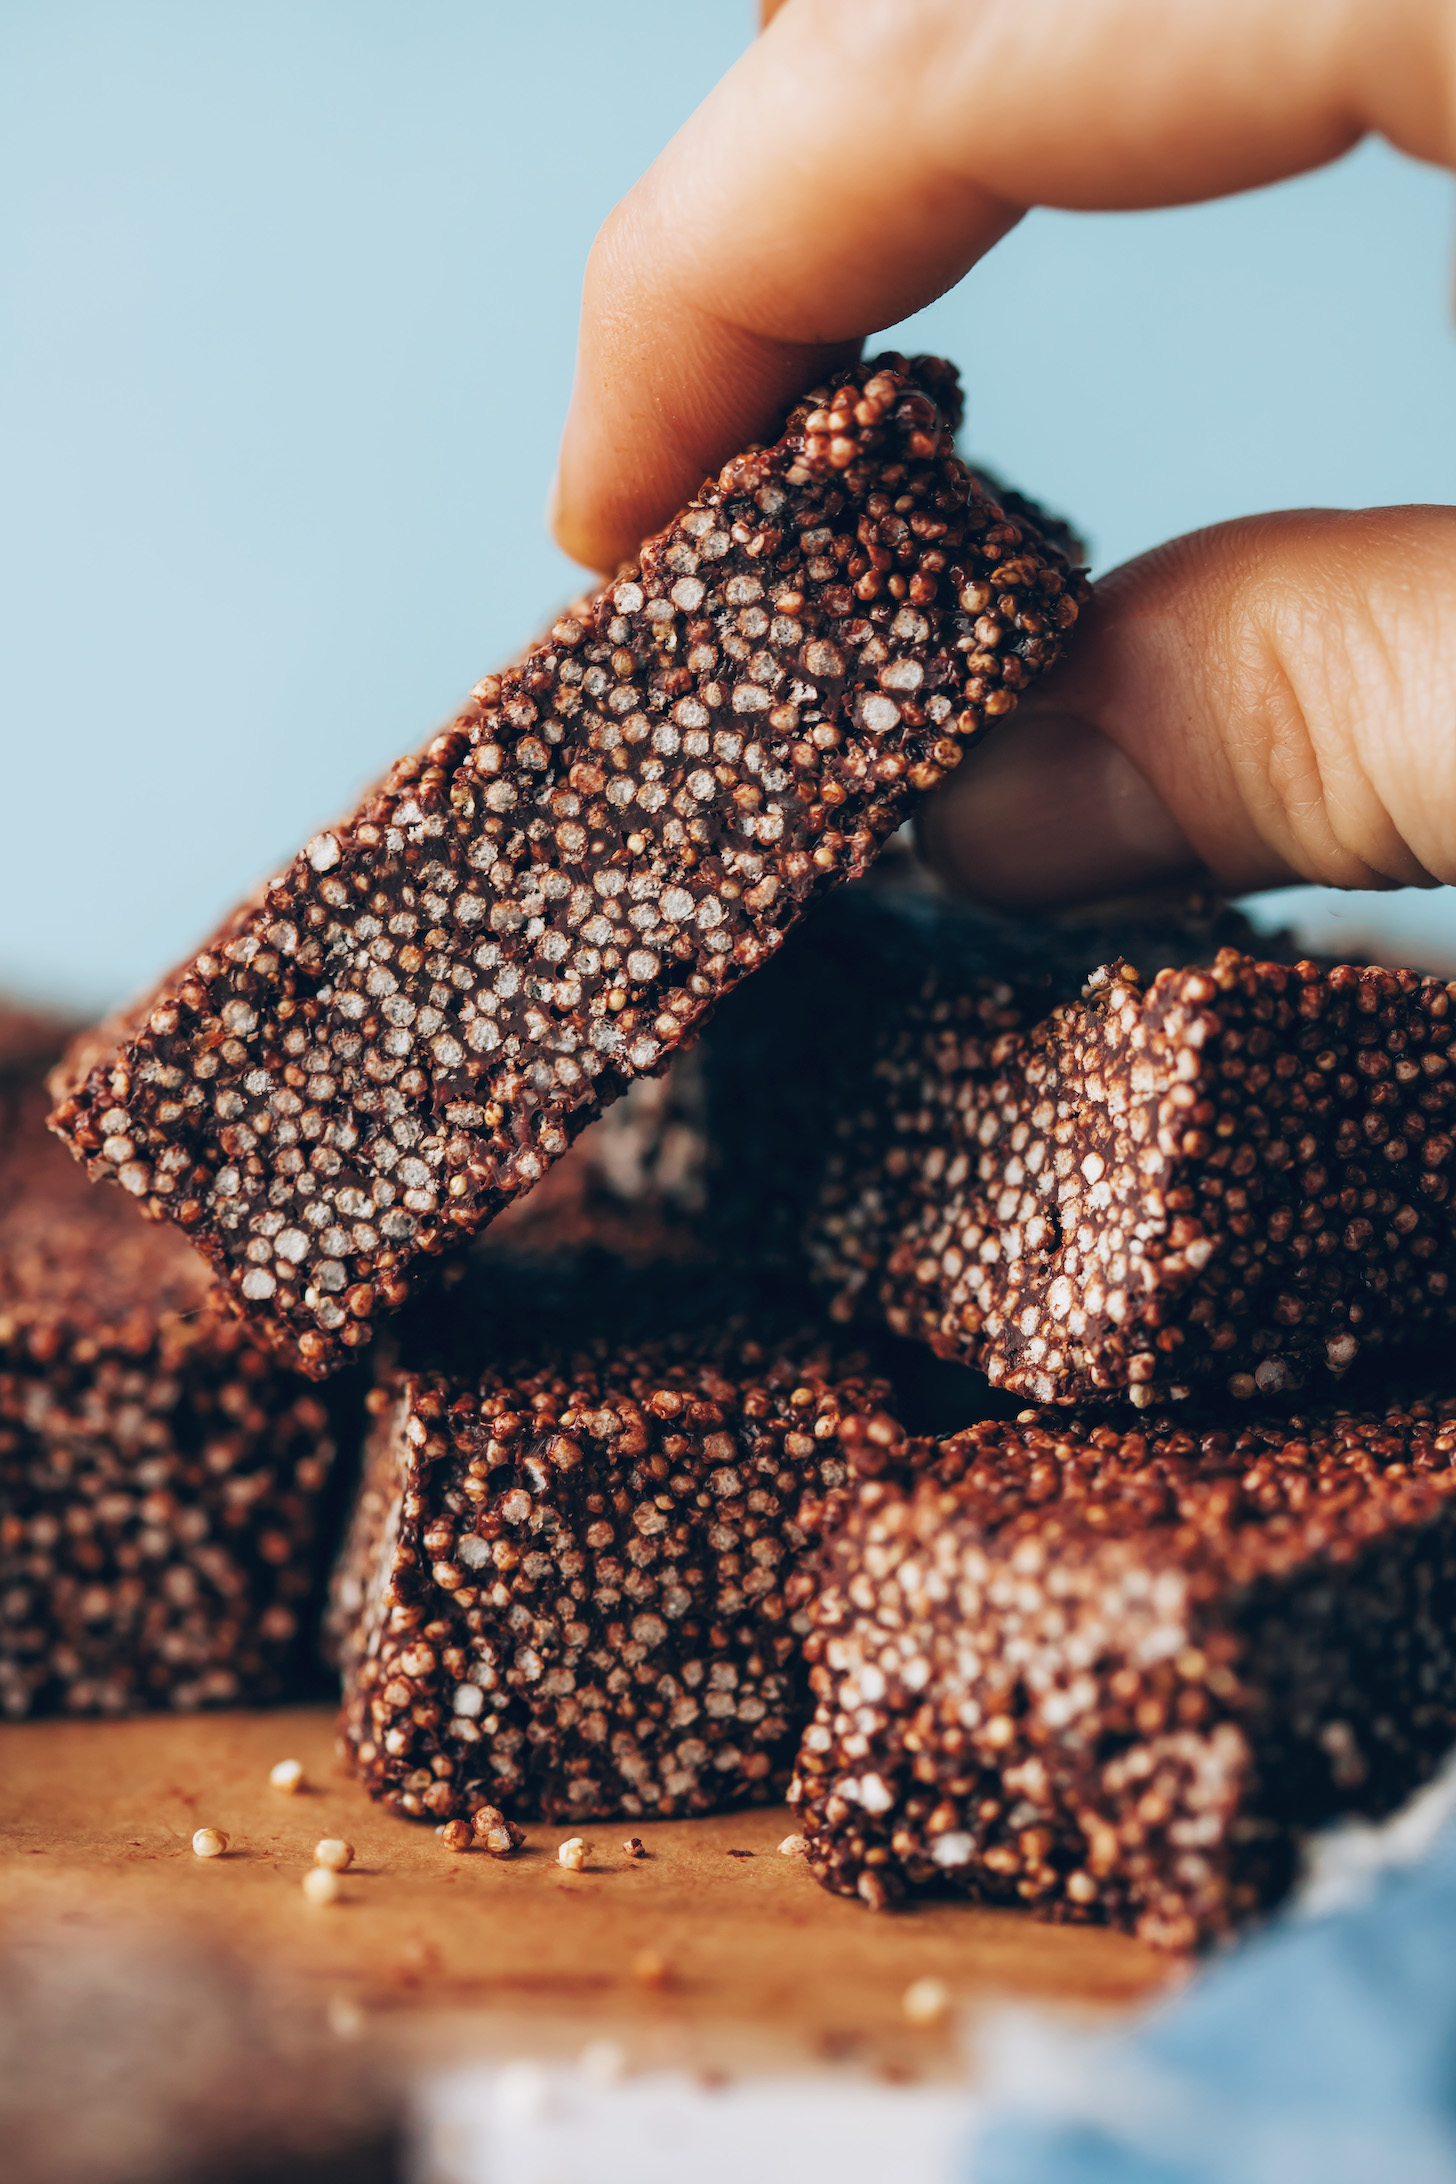 Showing the crispy wafer-like texture of a chocolate amaranth bar